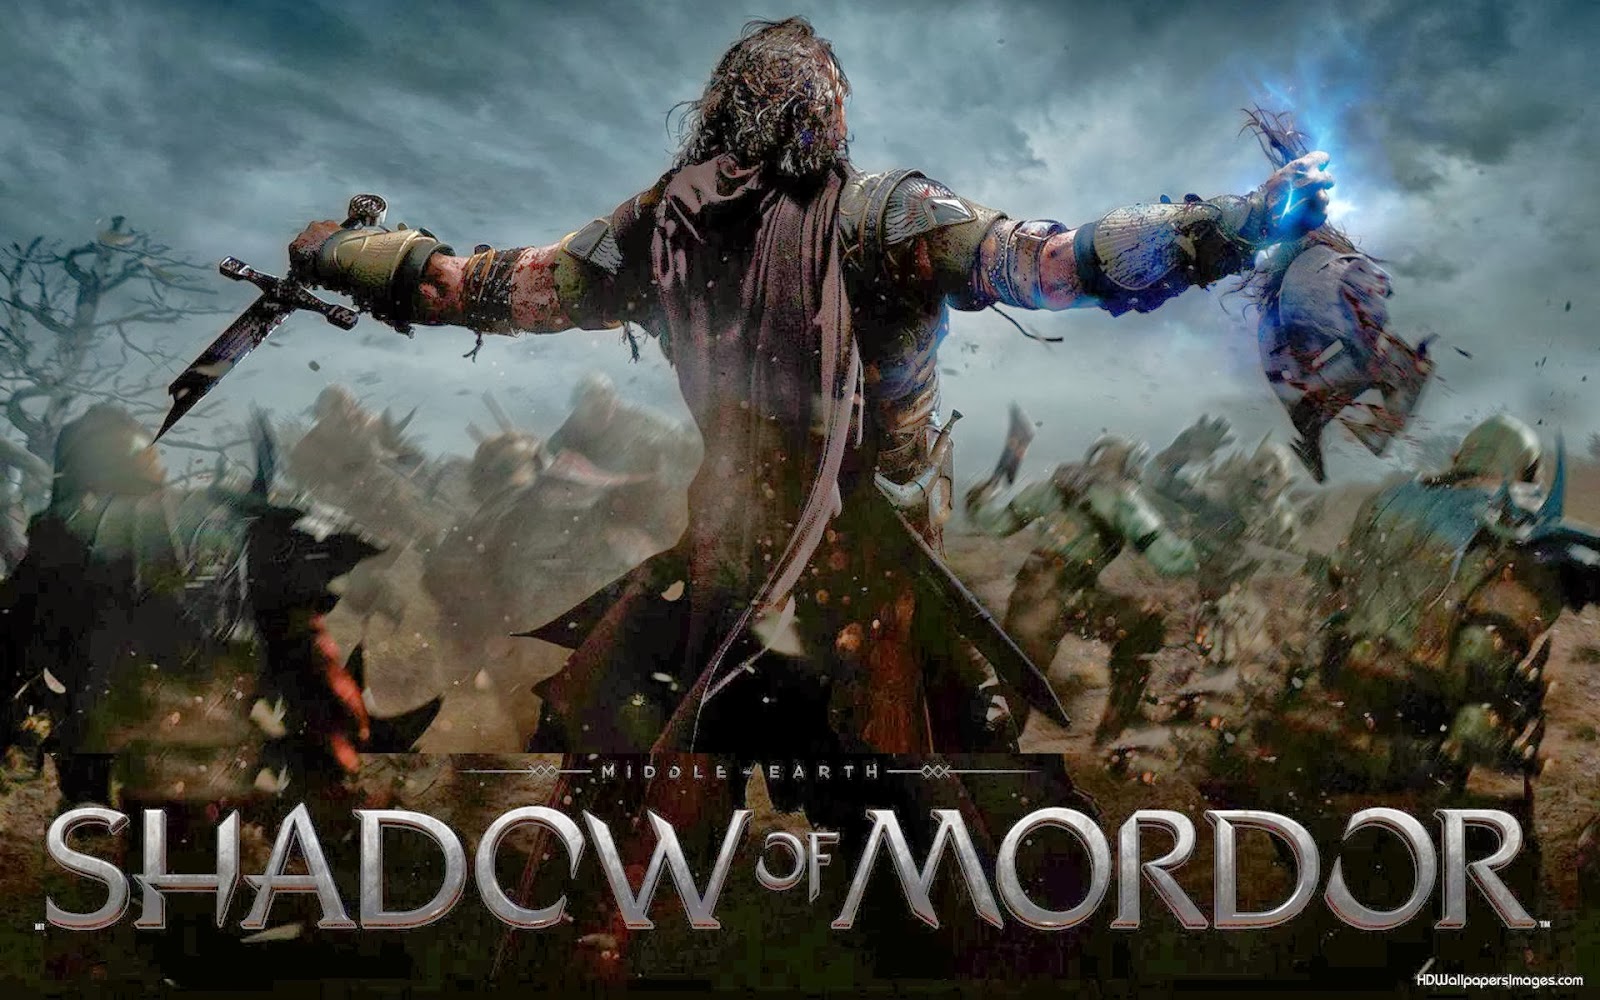 Jogo Middle-earth: Shadow of Mordor - Game of the Year Edition - PC 159230  - Canaltech Ofertas